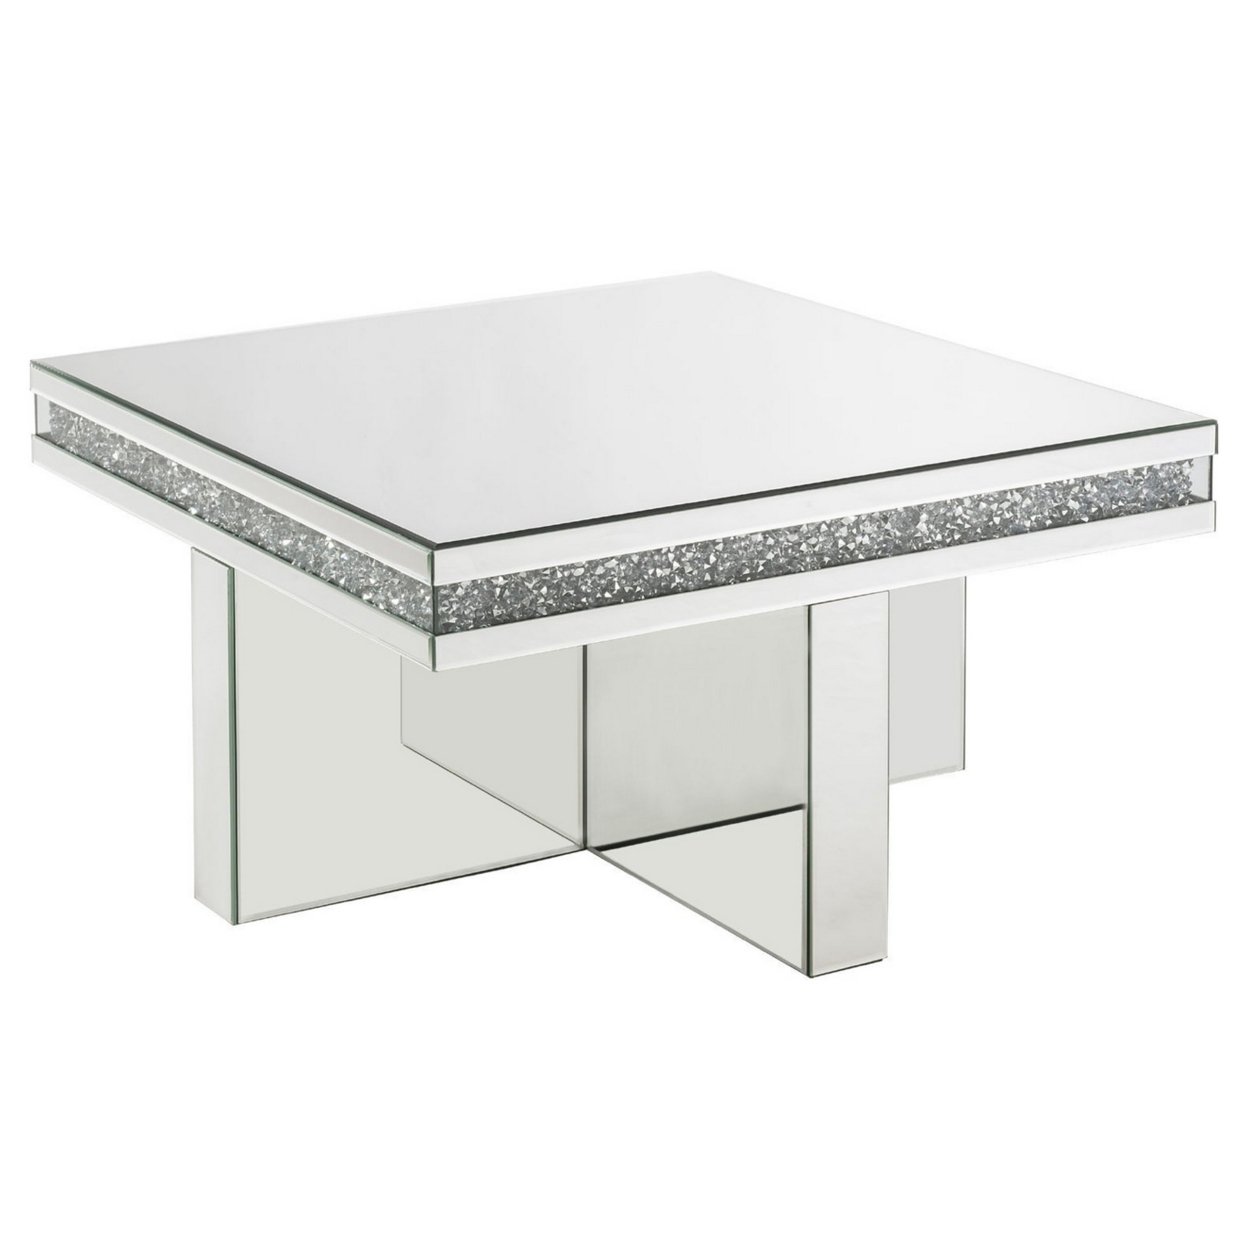 Coffee Table With Encrusted Faux Acrylic Inlay And Cross Base, Silver- Saltoro Sherpi